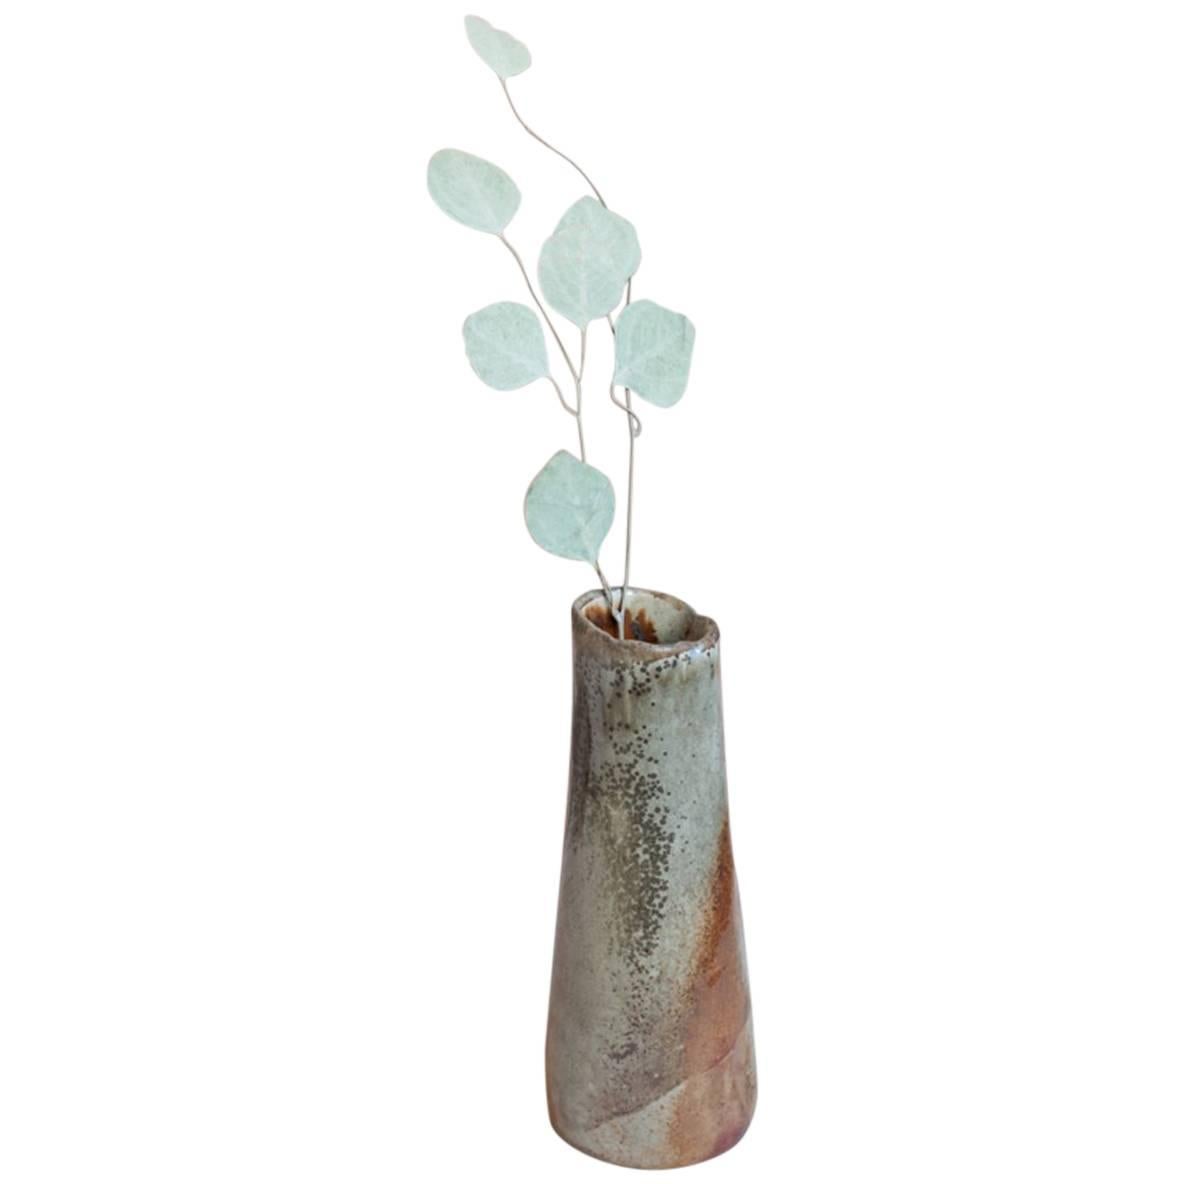 One of a kind organic modern hand-built tapered vase fired over several days in a Japanese-style Anagama-Noborigama wood-fire cross-draft kiln. Glaze goes from a metallic deep rust color to speckled grey.

Handmade wood-fired stoneware tapered